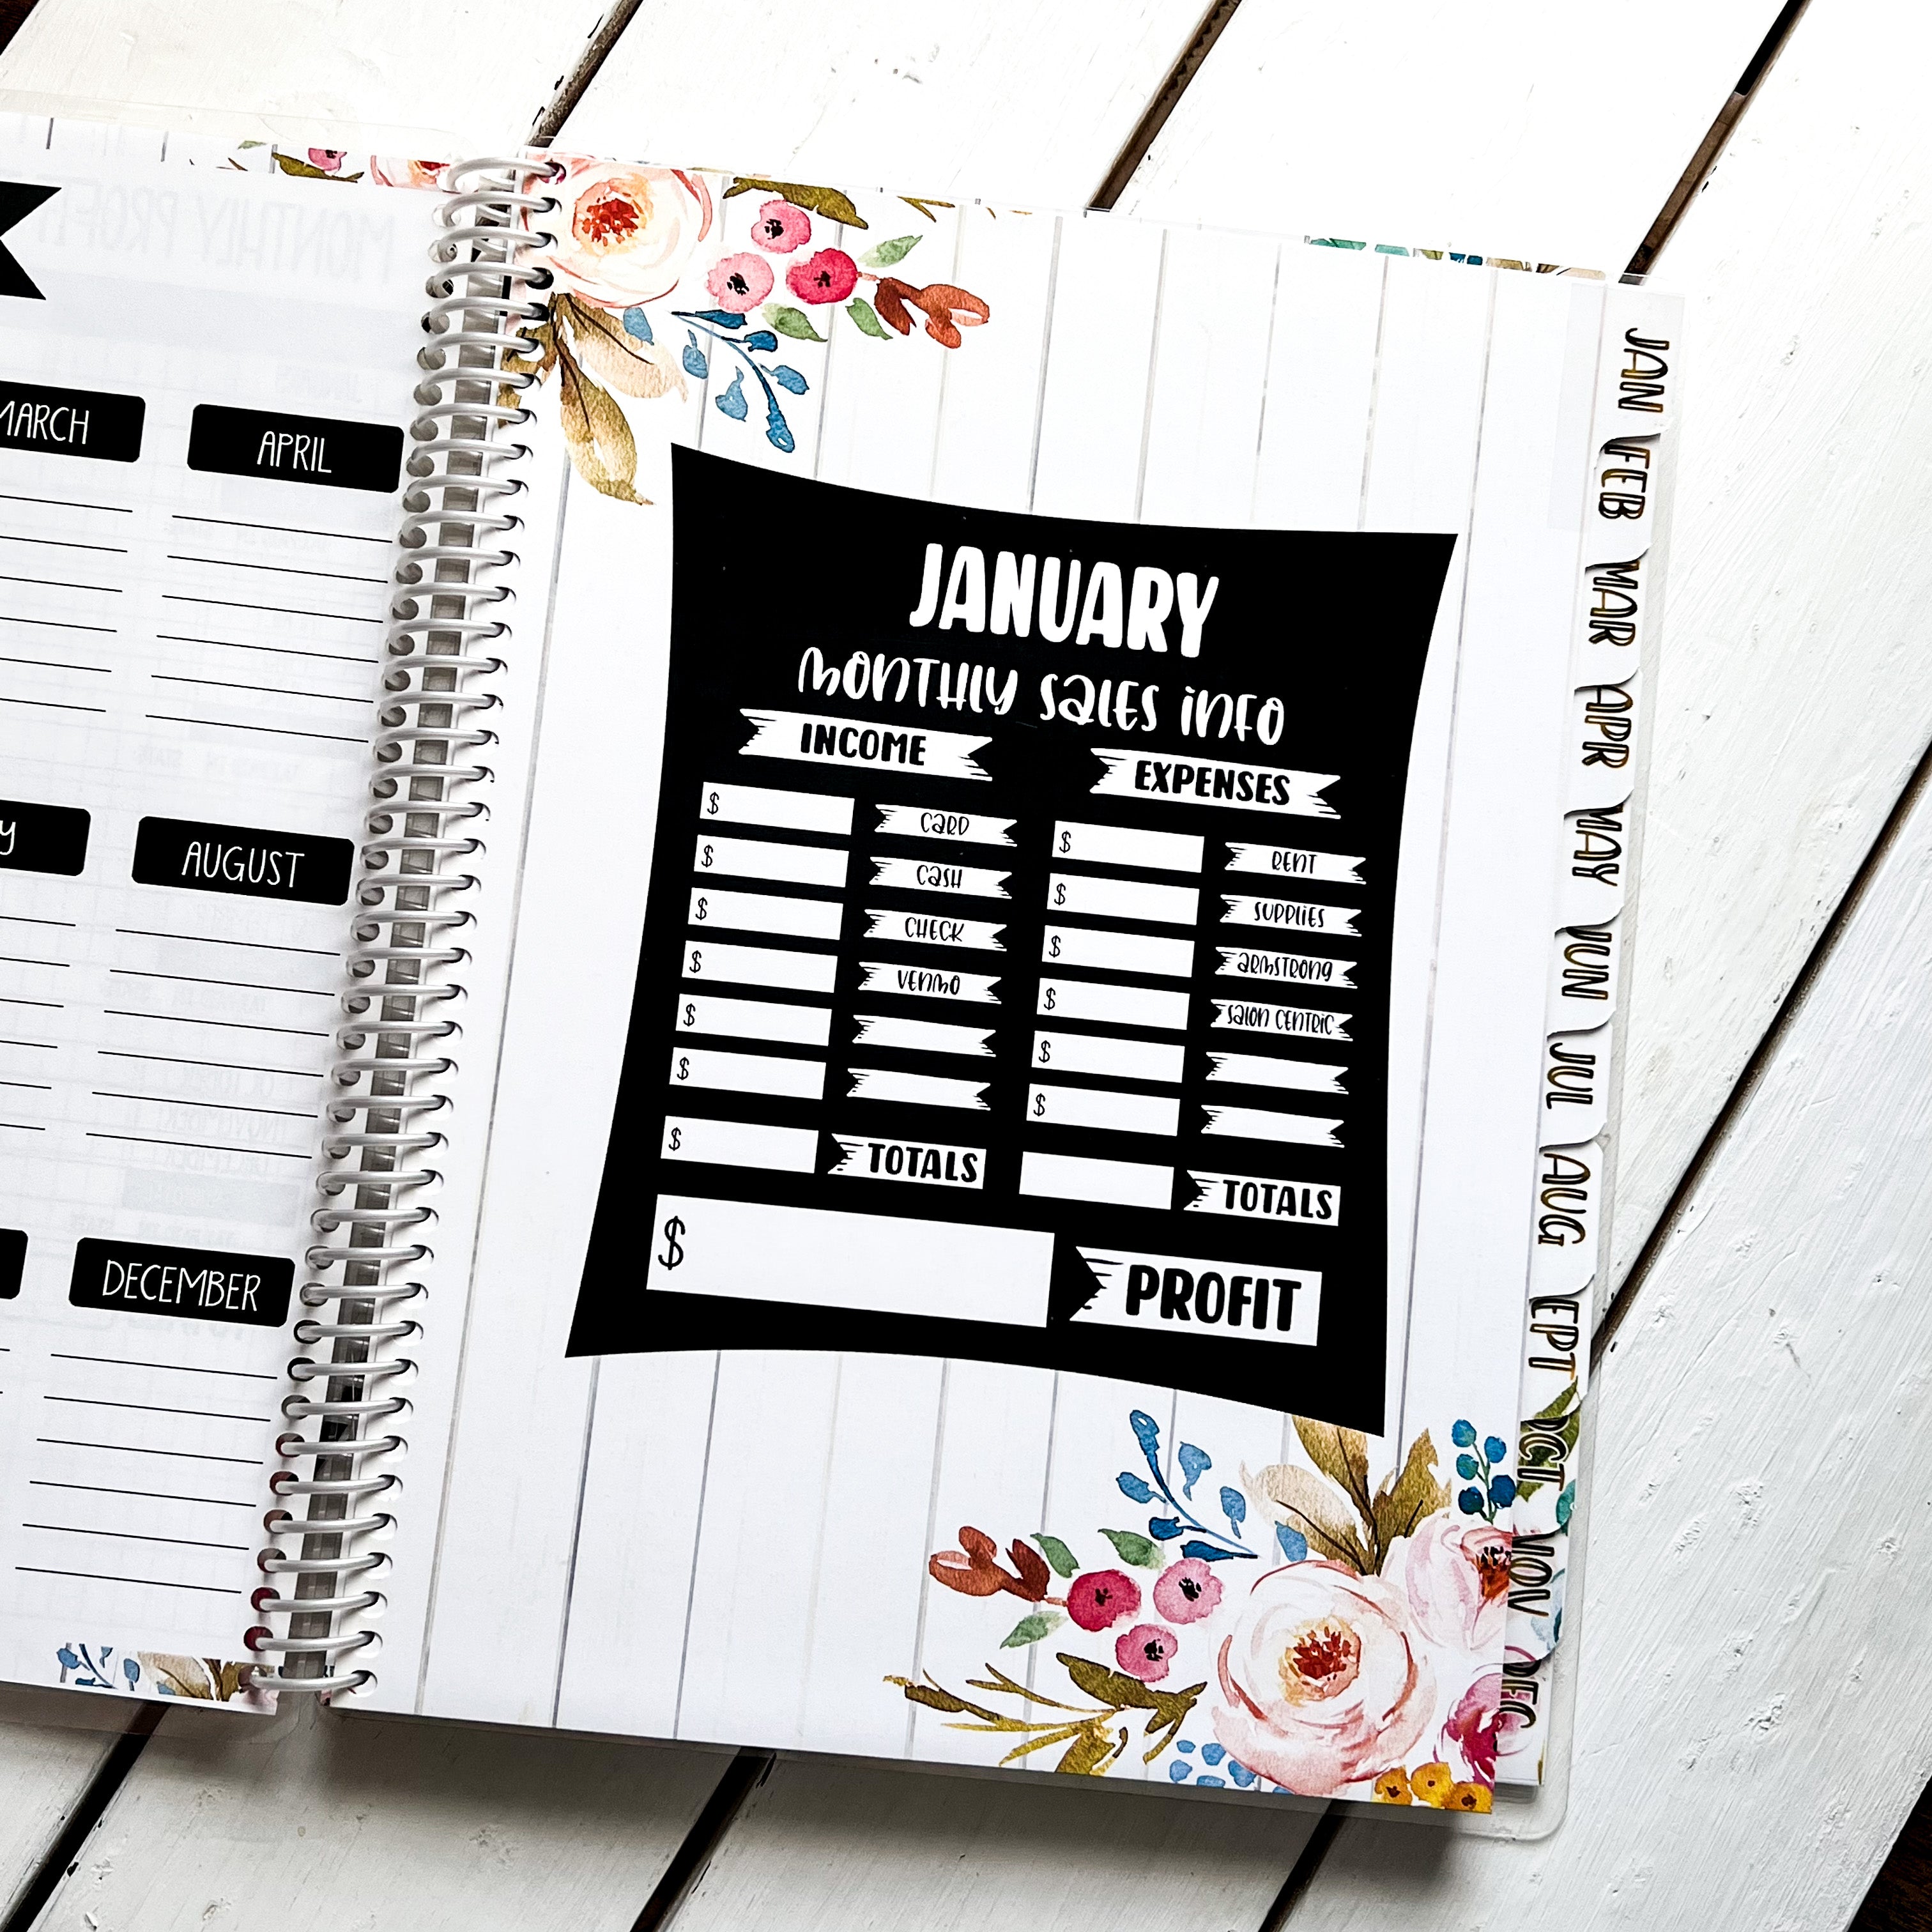 Sales Tracker Appointment Book - COLOR ME CHIC